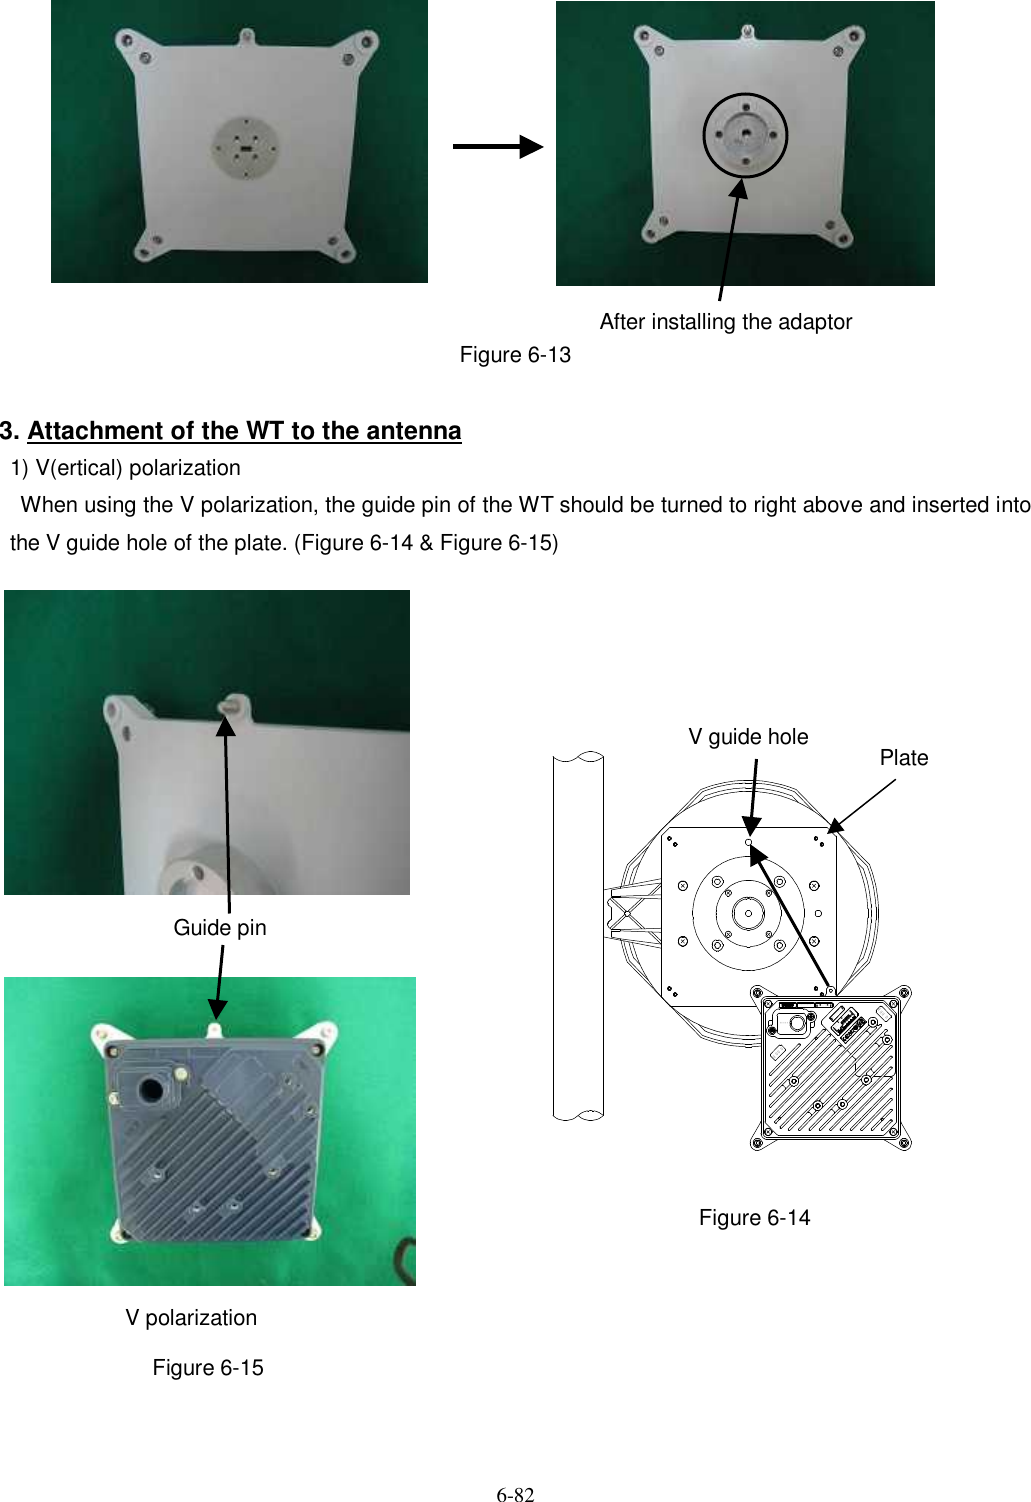   6-82            Figure 6-13  3. Attachment of the WT to the antenna 1) V(ertical) polarization     When using the V polarization, the guide pin of the WT should be turned to right above and inserted into the V guide hole of the plate. (Figure 6-14 &amp; Figure 6-15)                                  Figure 6-14        Figure 6-15   V polarization Guide pin Ｉ Ｃ： ７６ ８ Ｂ−Ｎ Ｔ Ｇ３ ３７ 注 ５ＴＯＰ ＶＴ ＯＰ ＨＥＴ Ｈ ＥＲＩＮＰＵ Ｔ ：Ｓ Ｅ Ｒ ． Ｎ Ｏ ：Ｍ Ａ Ｃ ：．： ： ： ： ：ＭＡＤＥ ＩＮ ＪＡＰ ＡＮＤＣ２ ４Ｖ ０．７ＡＴＹＰＥＷ −Ｗ Ｔ ＜ 注 １ ＞ＦＣＣＩ Ｄ： Ｃ ＫＥＮＴＧ３３ ７ − 注 １ＷＴ ＥＬ２ＭＯＤＥＬ：ＮＴＧ−３３７注２ＲV guide hole Plate After installing the adaptor 